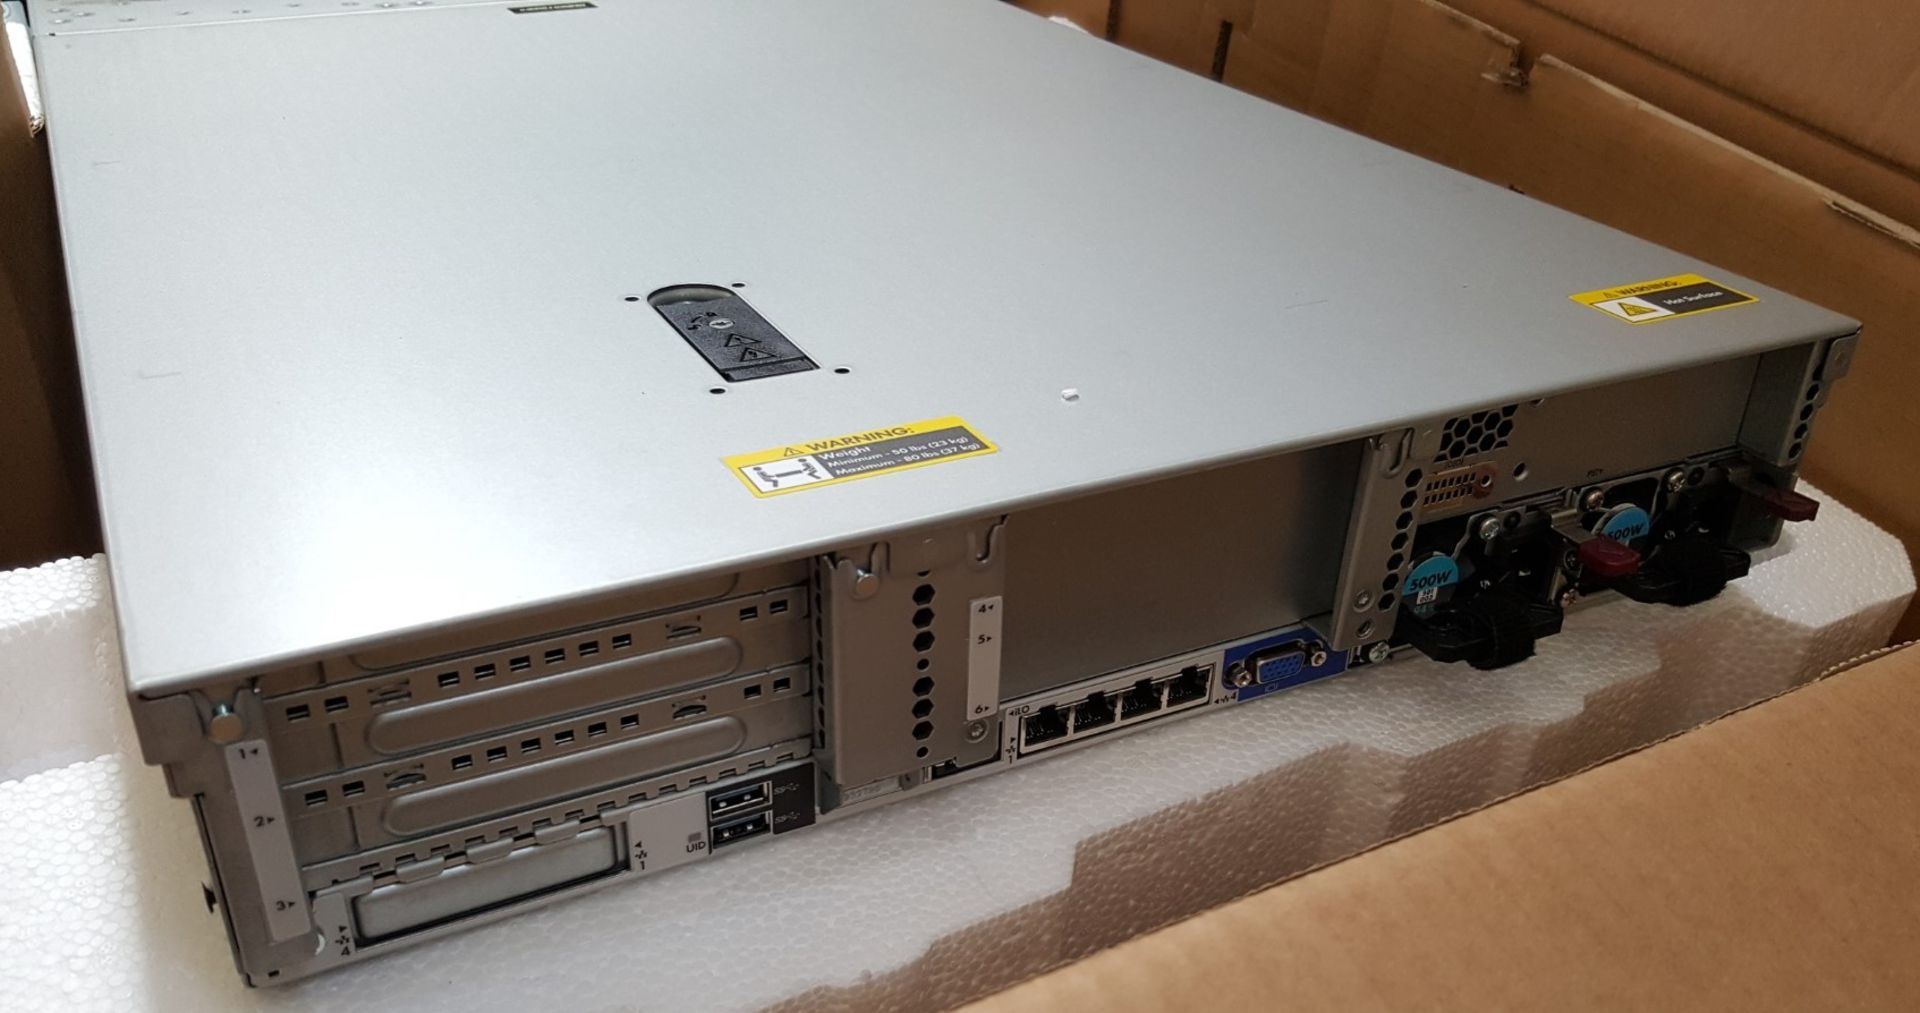 1 x HP ProLiant DL380 G9 Computer Server With Intel Xeon E5-2620V3 Six Core 2.4ghz Processor and - Image 2 of 5